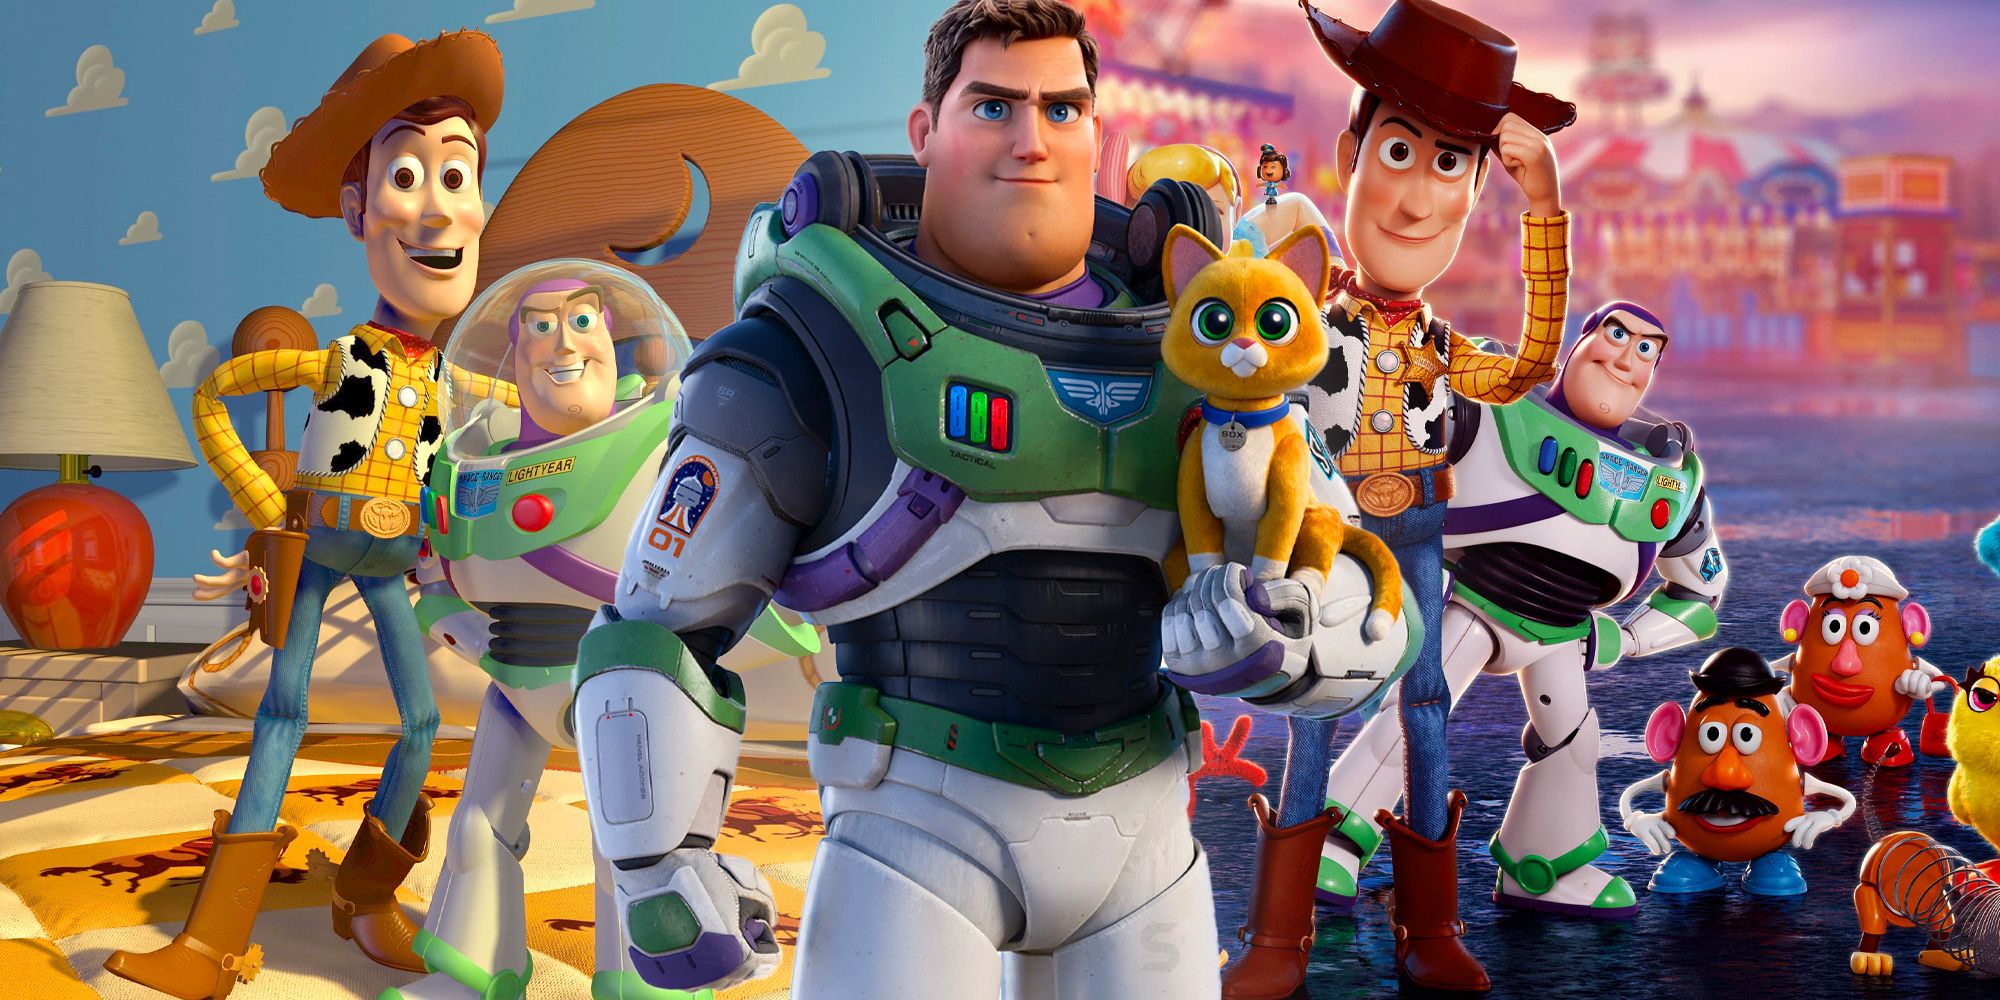 Toy Story Movies Chris Evans as Buzz Lightyear